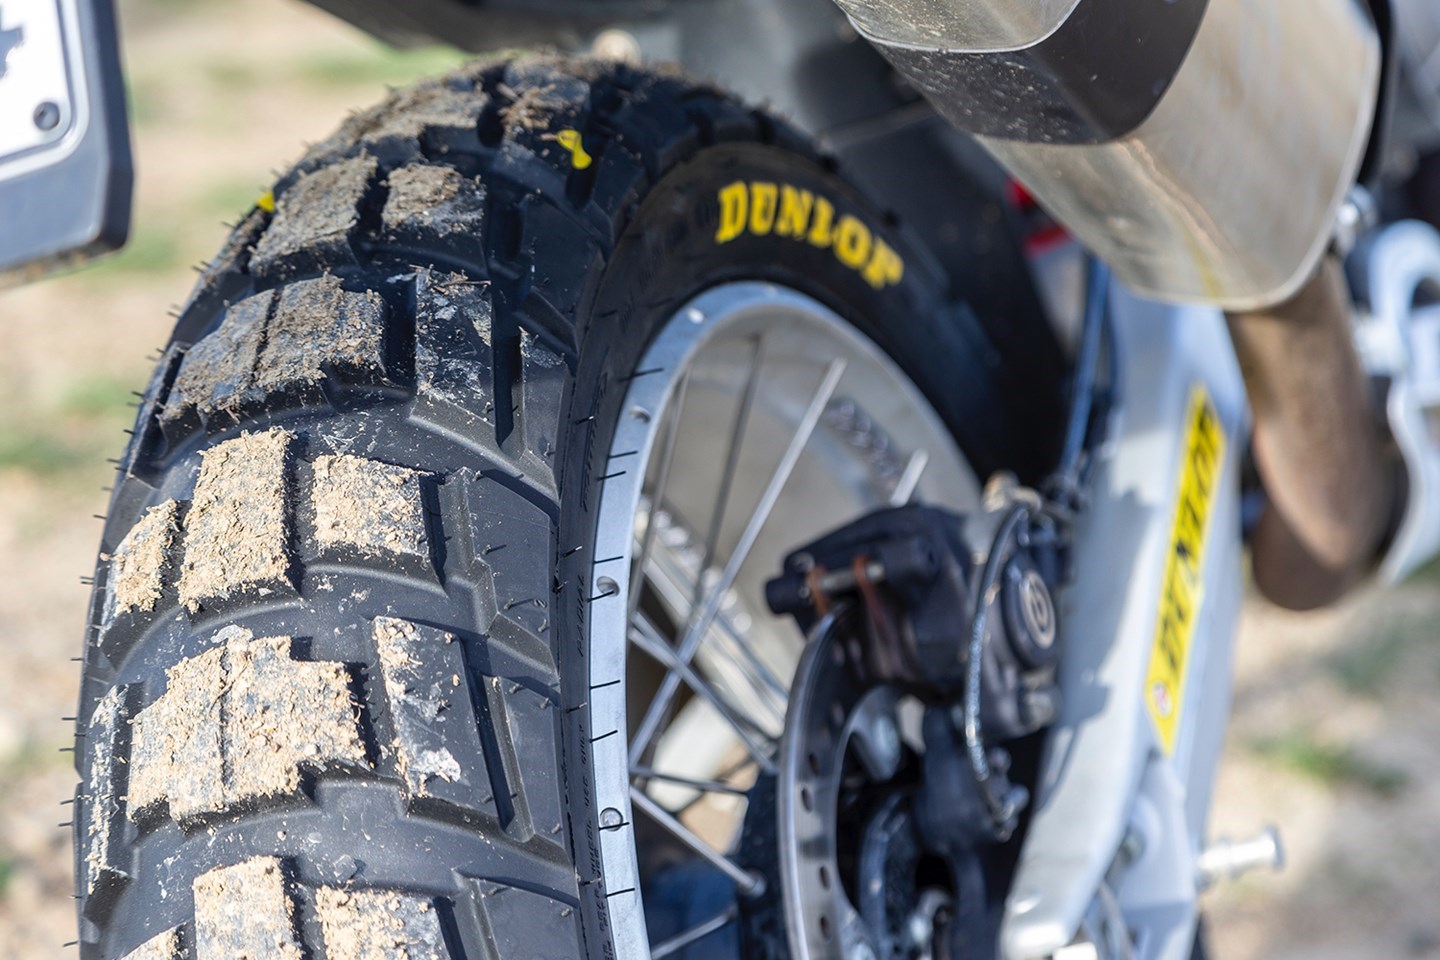 Dunlop Touring Tires in Tire Performance Grade 